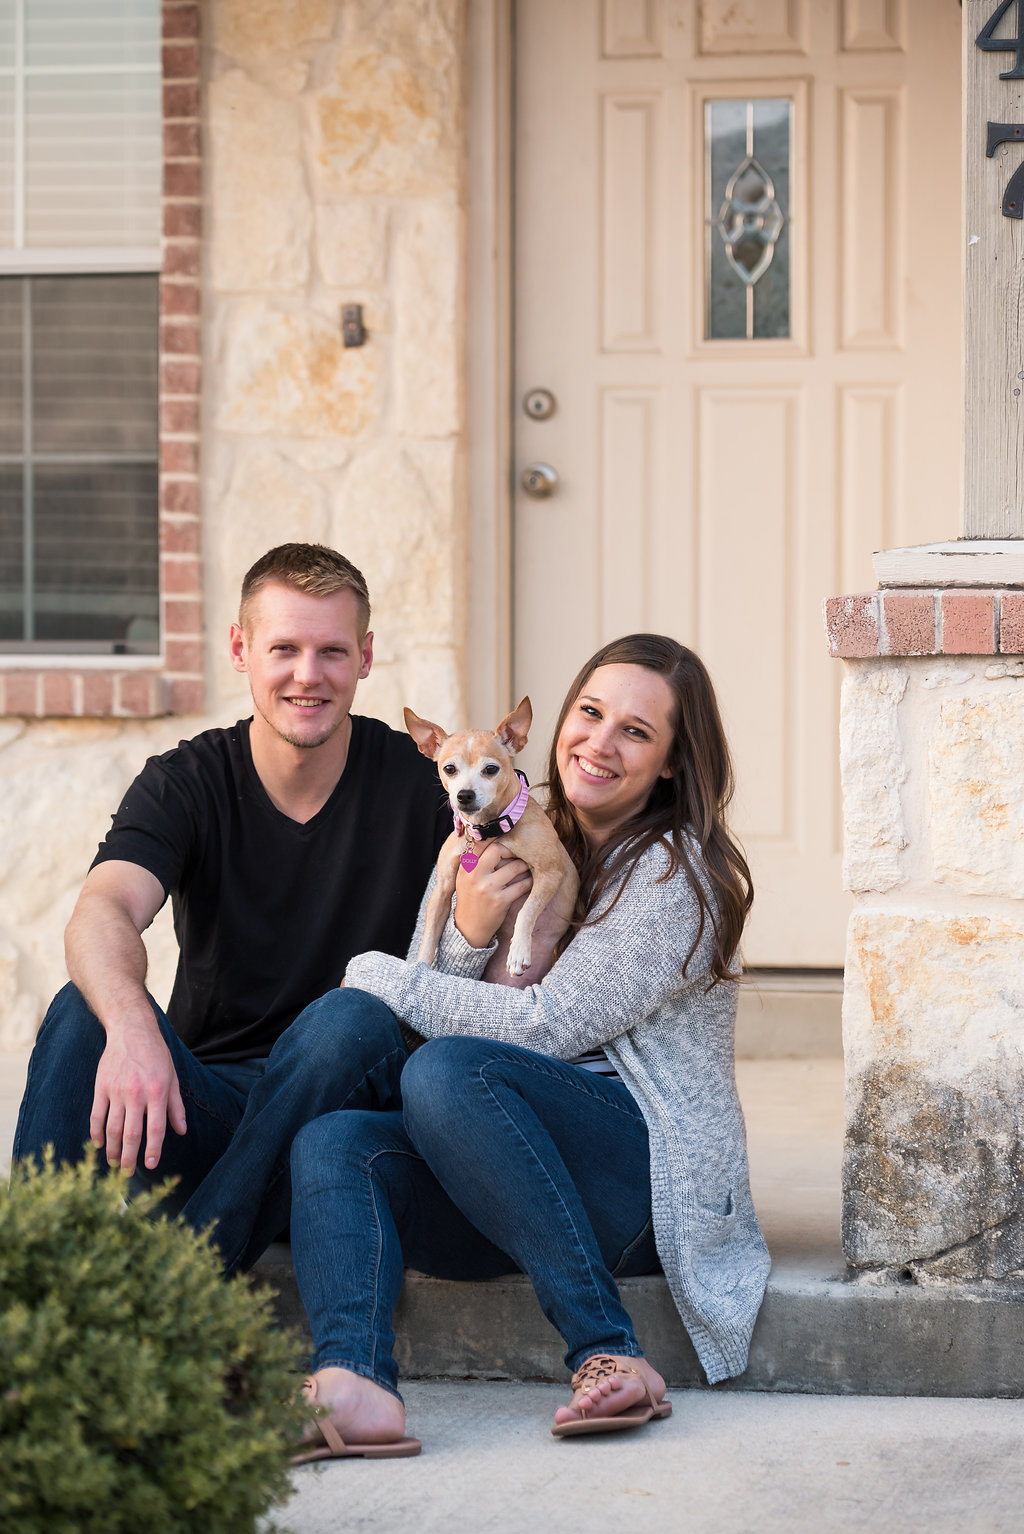 Our First Home Photos by Kori Newman